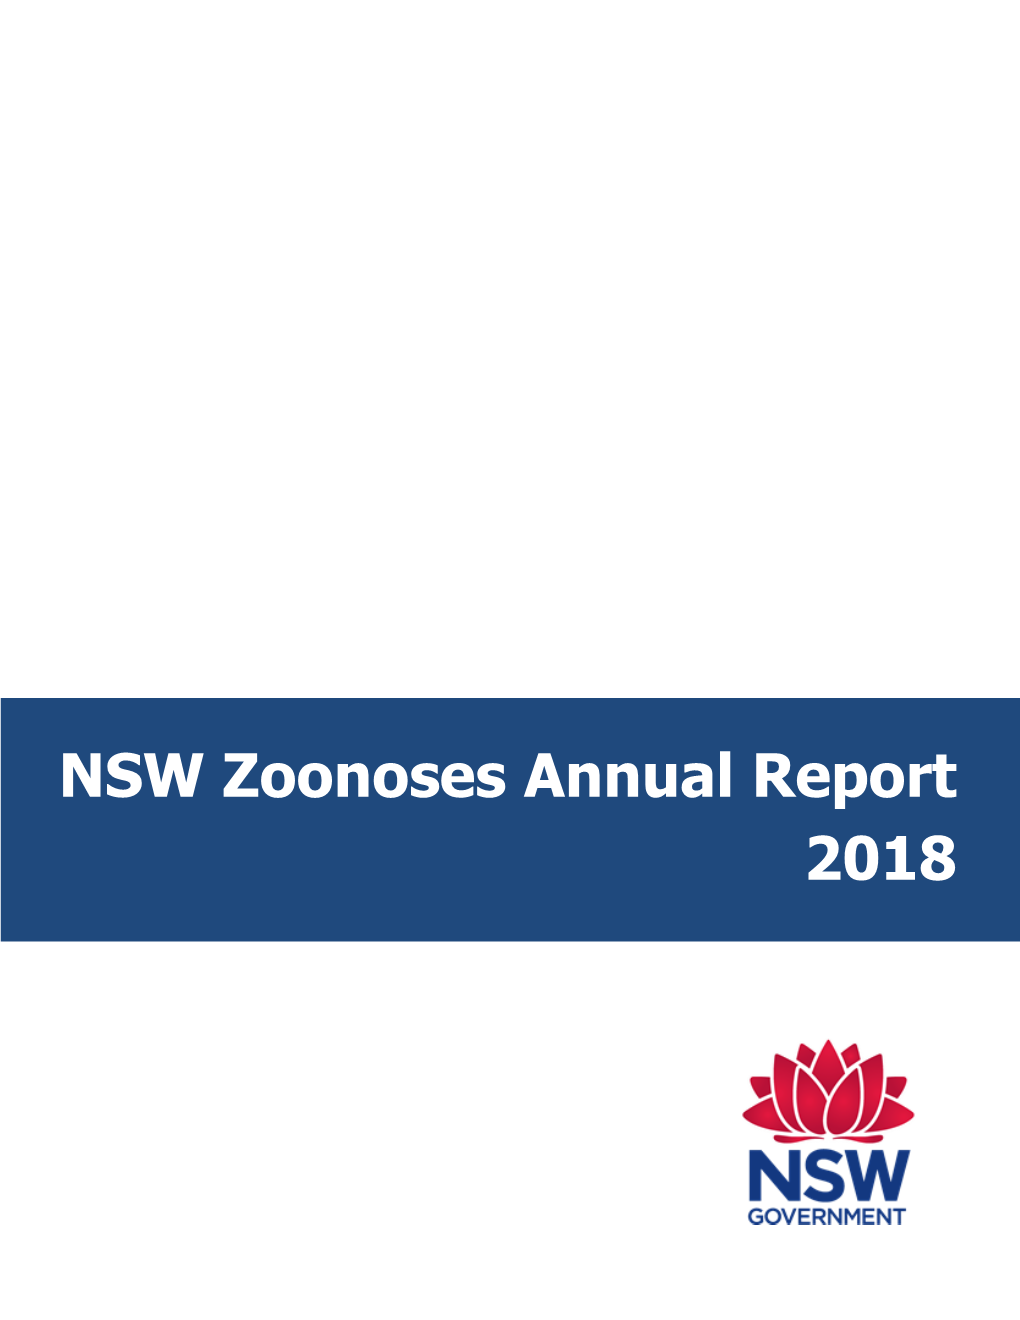 NSW Zoonoses Annual Report 2018